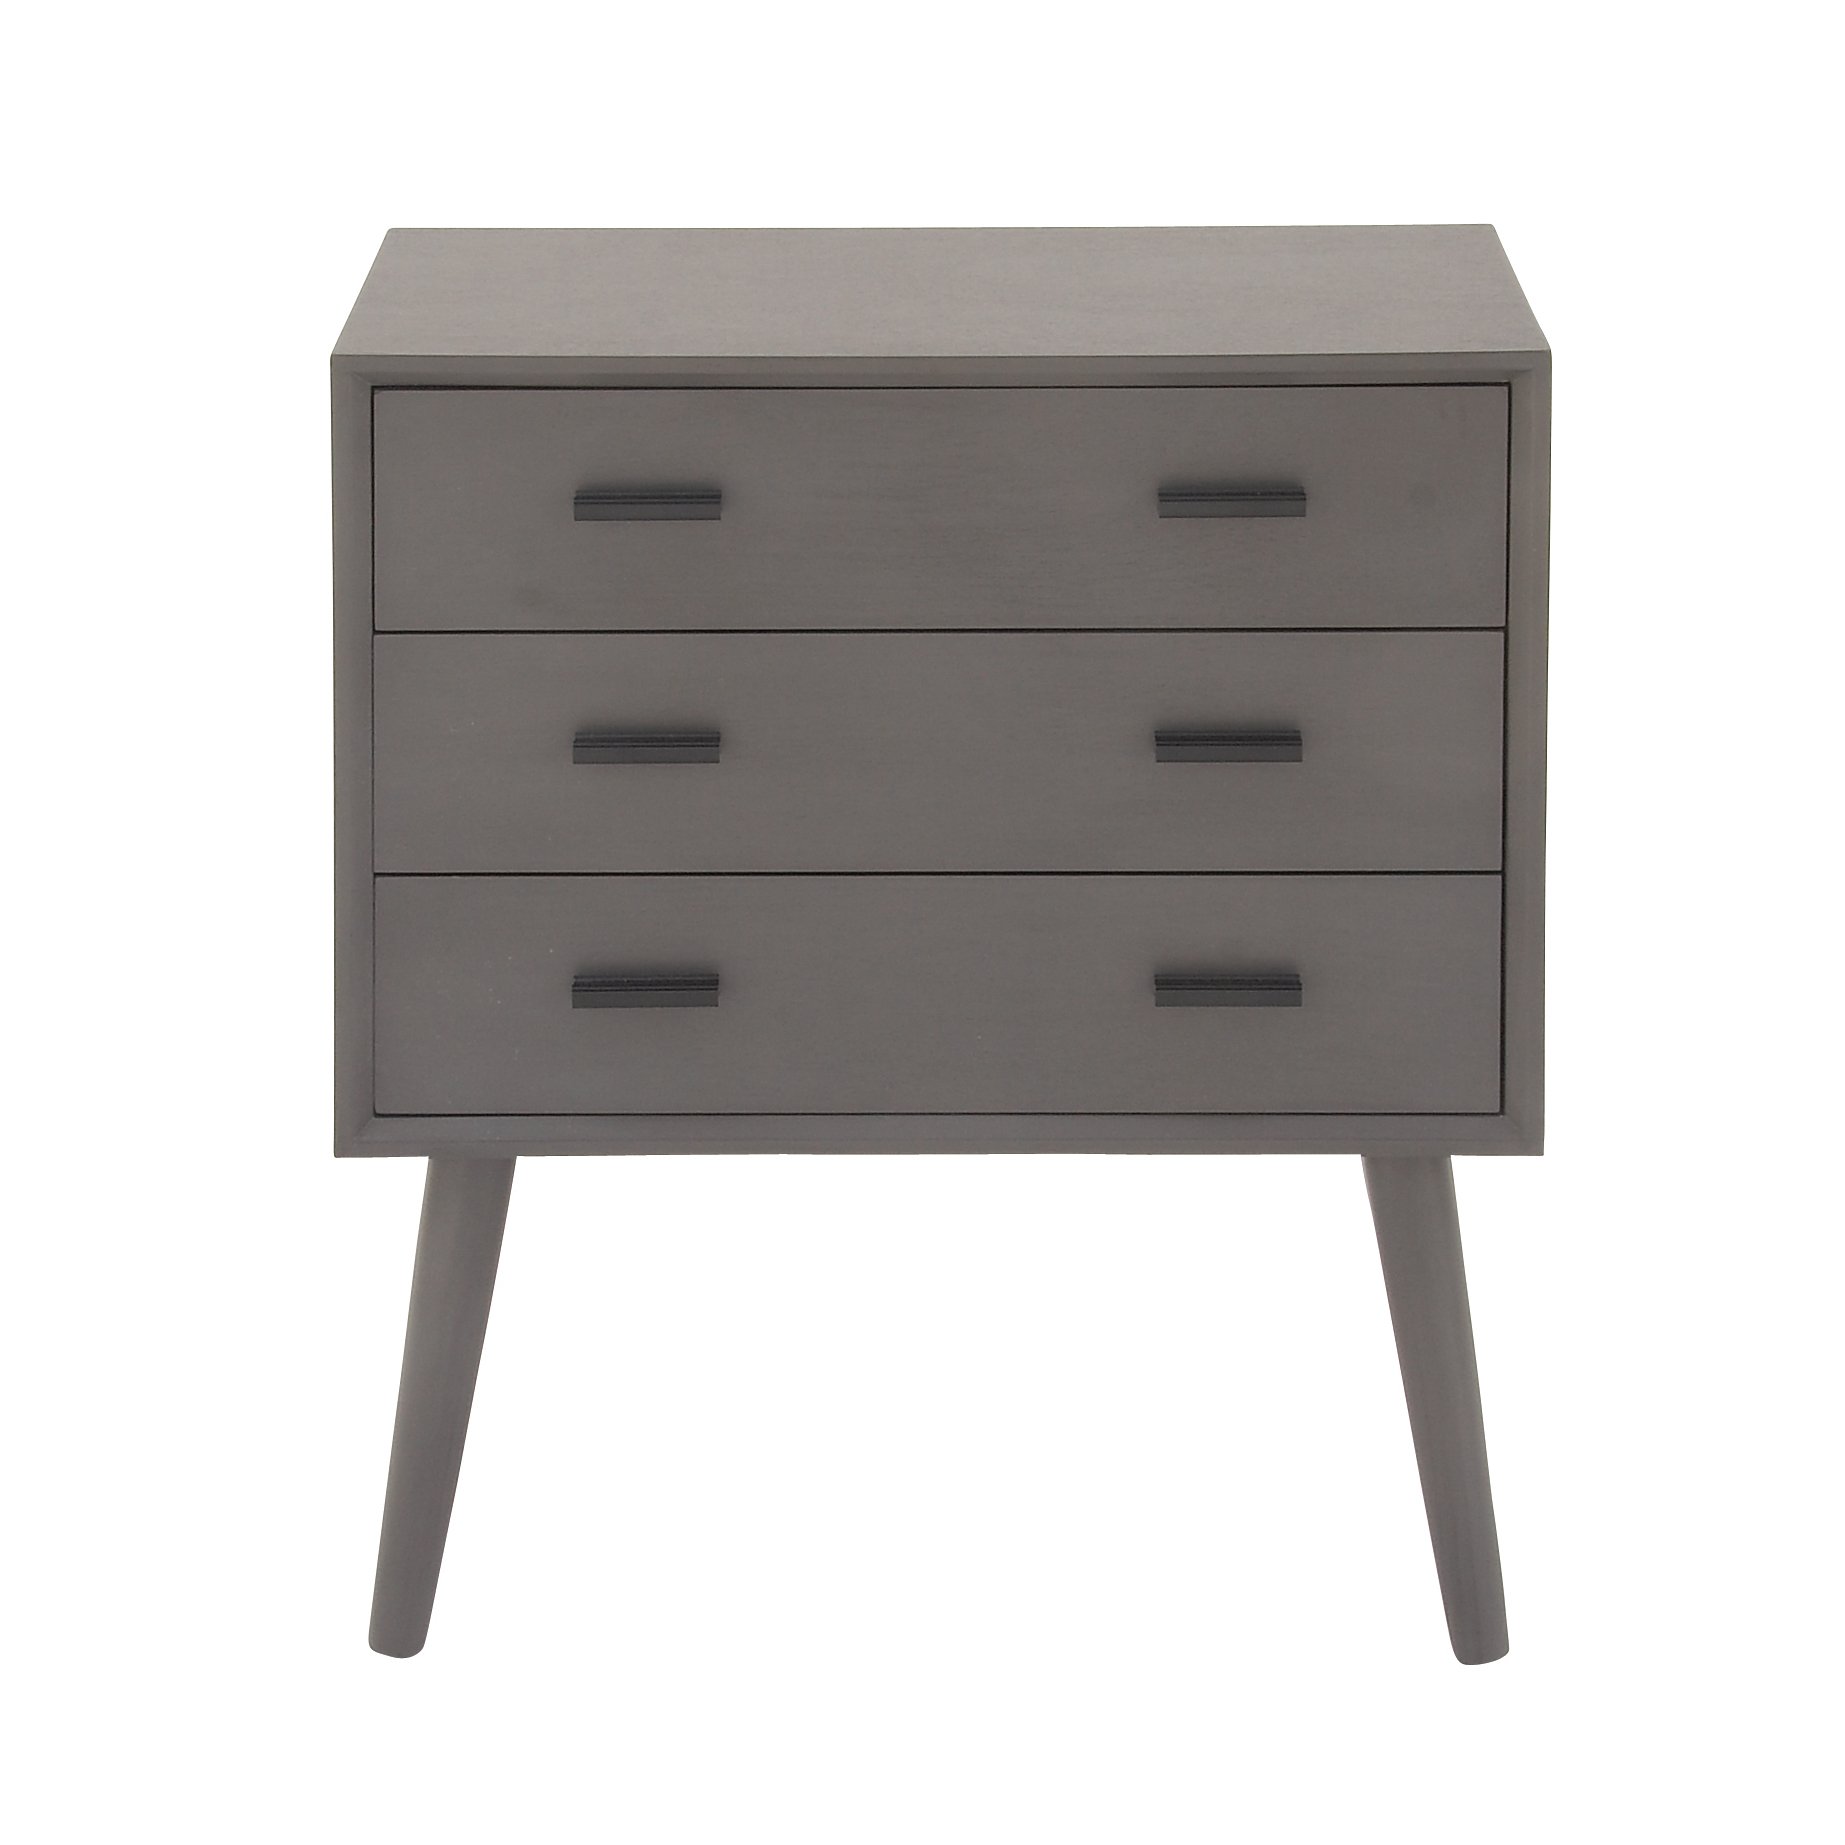 urban designs alton mid century drawer grey wood accent chest night table free shipping today target bar stools chair dining west elm coffee desk battery operated lamp shoe